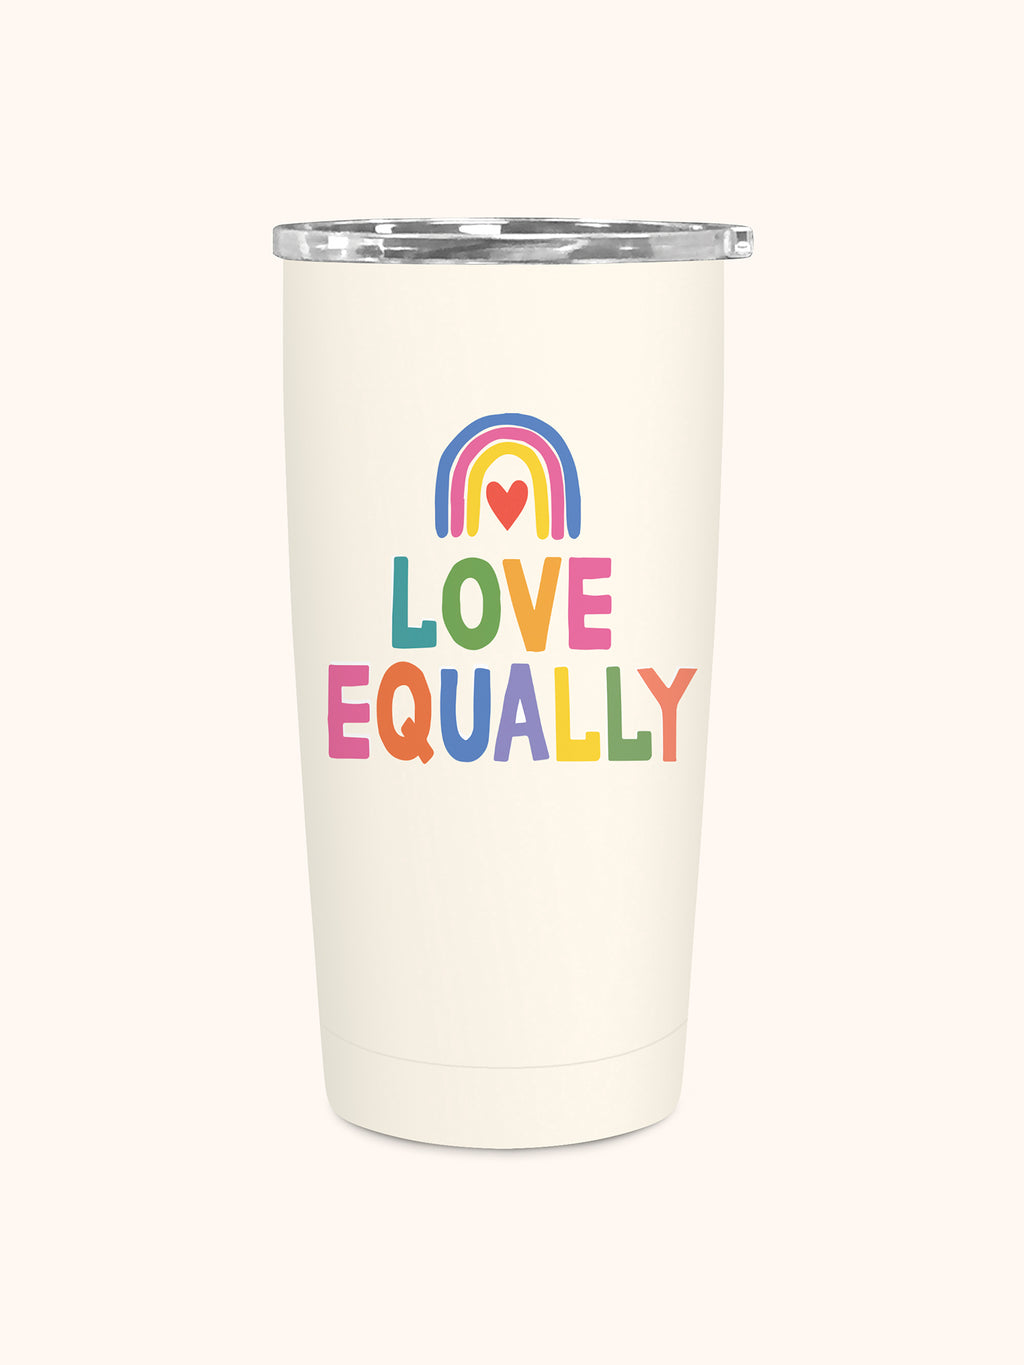 Kindness Matters Insulated Stainless Steel Coffee Tumbler – Studio Oh!